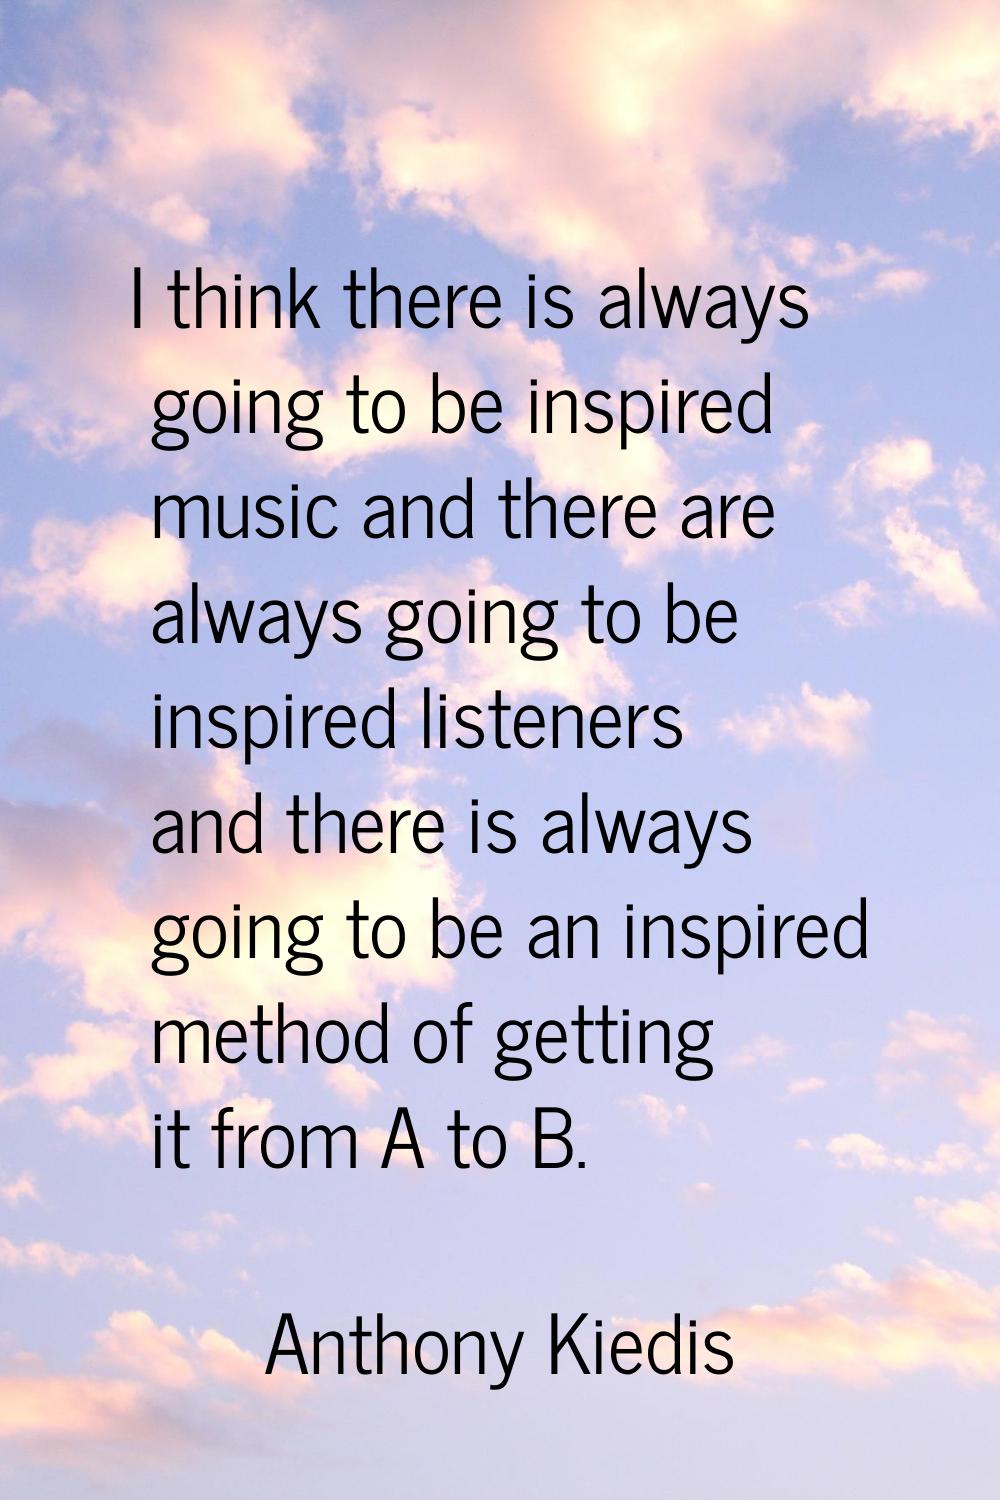 I think there is always going to be inspired music and there are always going to be inspired listen